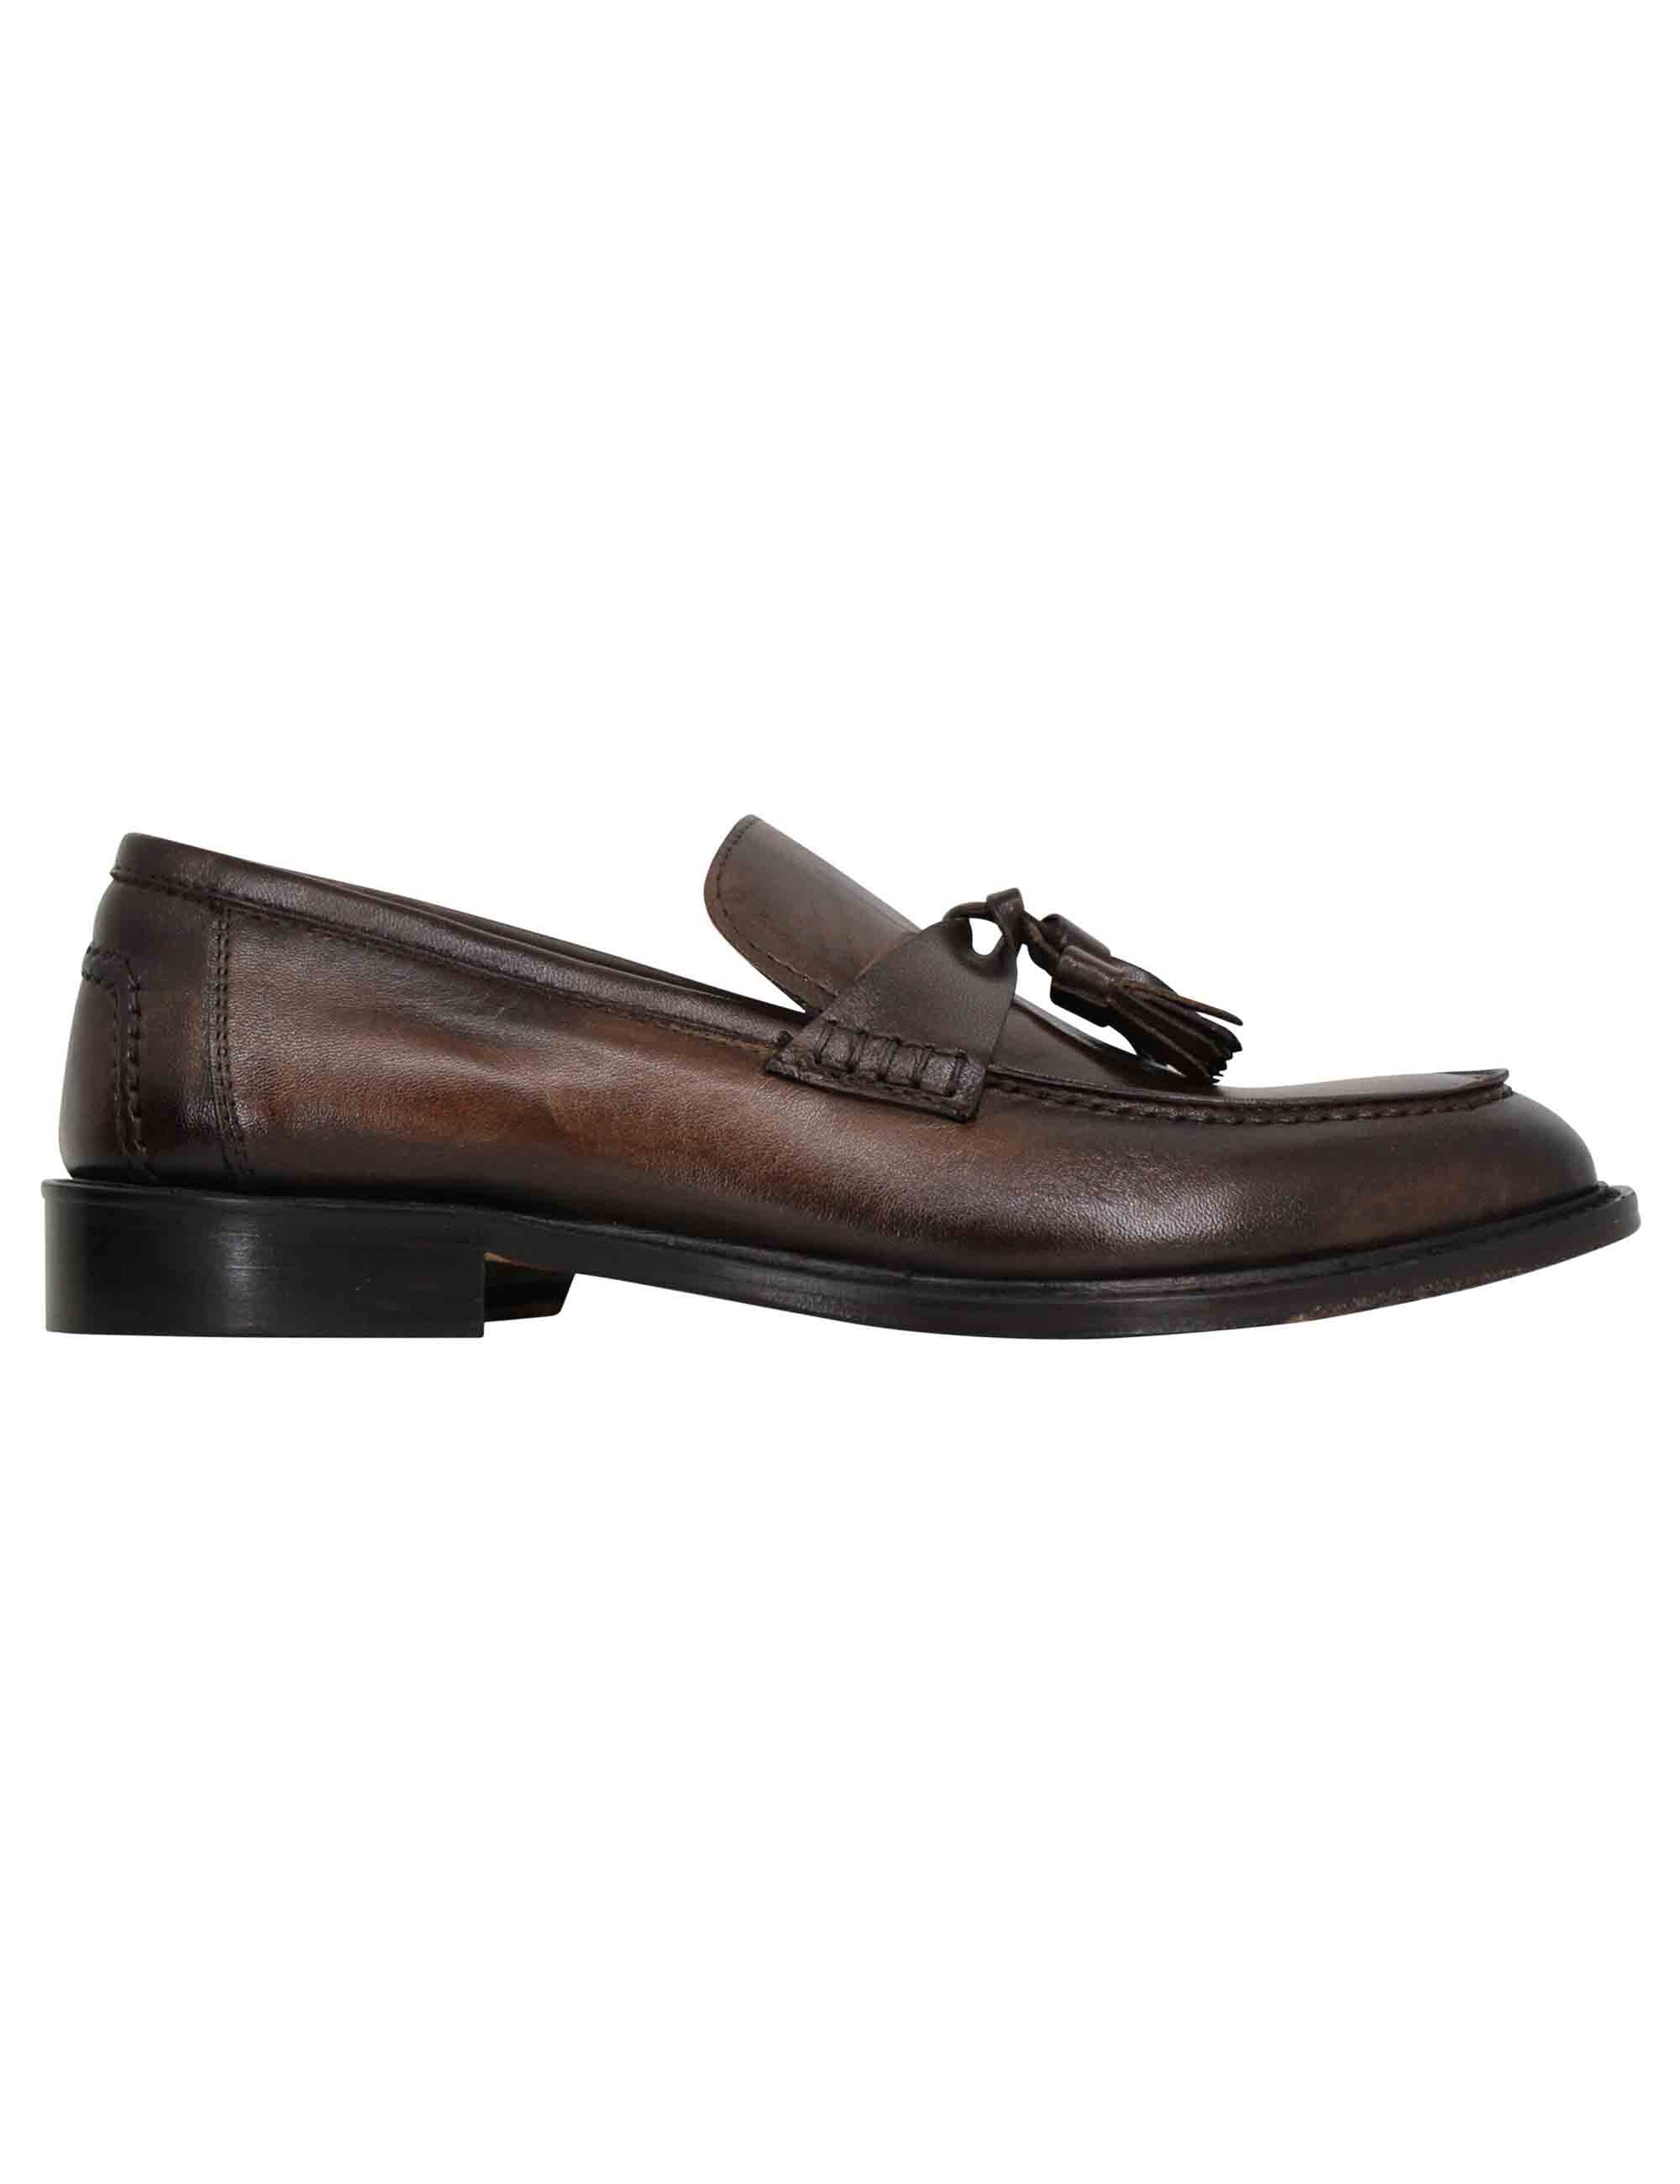 Men's brown leather loafers with bows and stitched leather sole